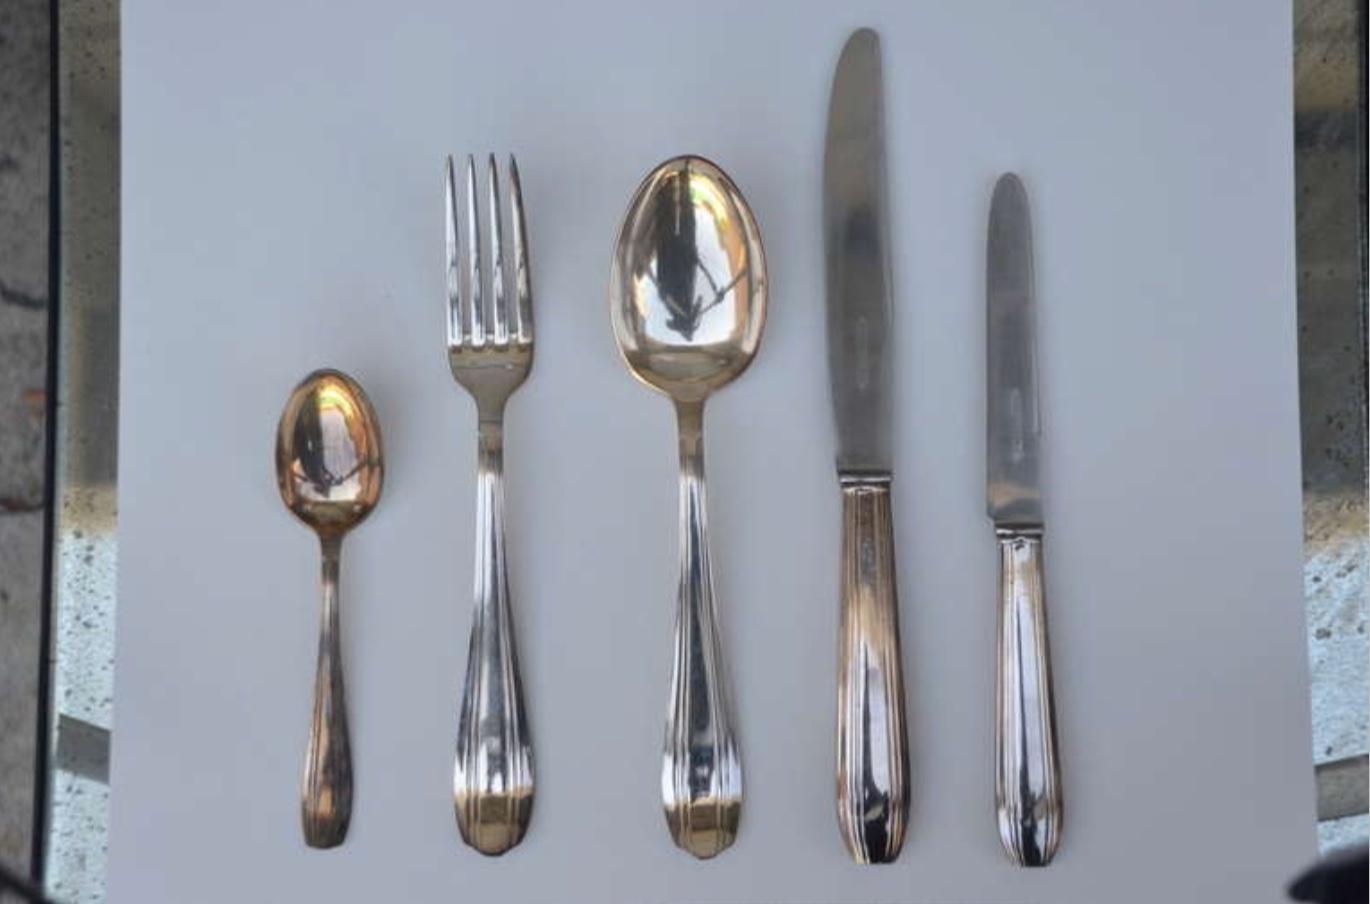 Set of Elegant French Art Deco silver tableware
Quantities:
Knives 12 (length: 10 in.)
Knives (small) 12
Spoons 12
Spoons (small) 12
Forks 12
Serving spoon 1 (12.5 in.)

(Brown) box set measurements:
Height 3 in.
Width 14 in.
Depth 12 in.

(Blue)